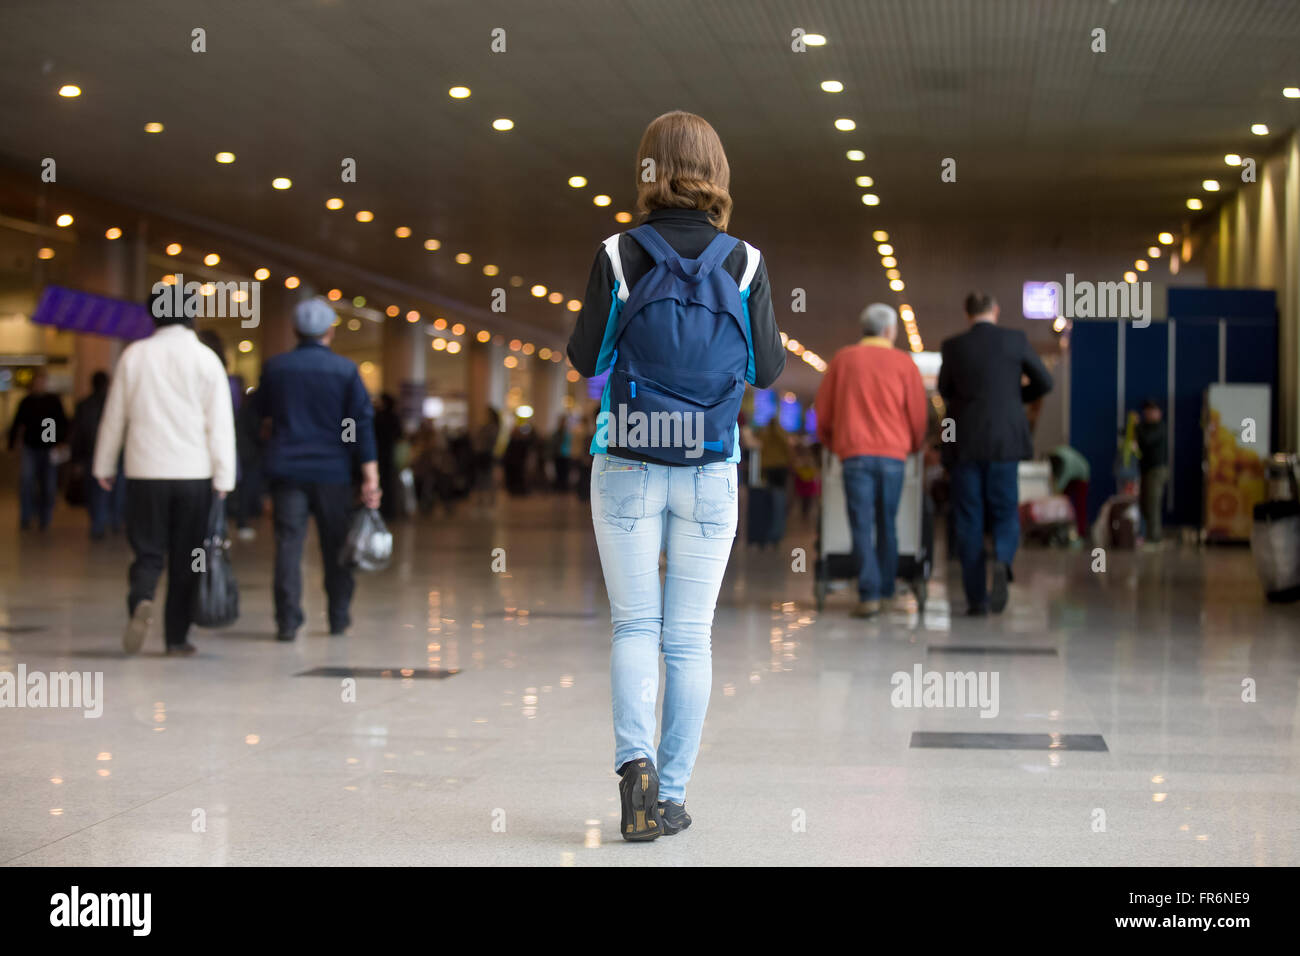 Young woman in 20s with backpack walking in airport terminal, wearing jersey, jeans and sneakers, blurred crowd of travelling pe Stock Photo